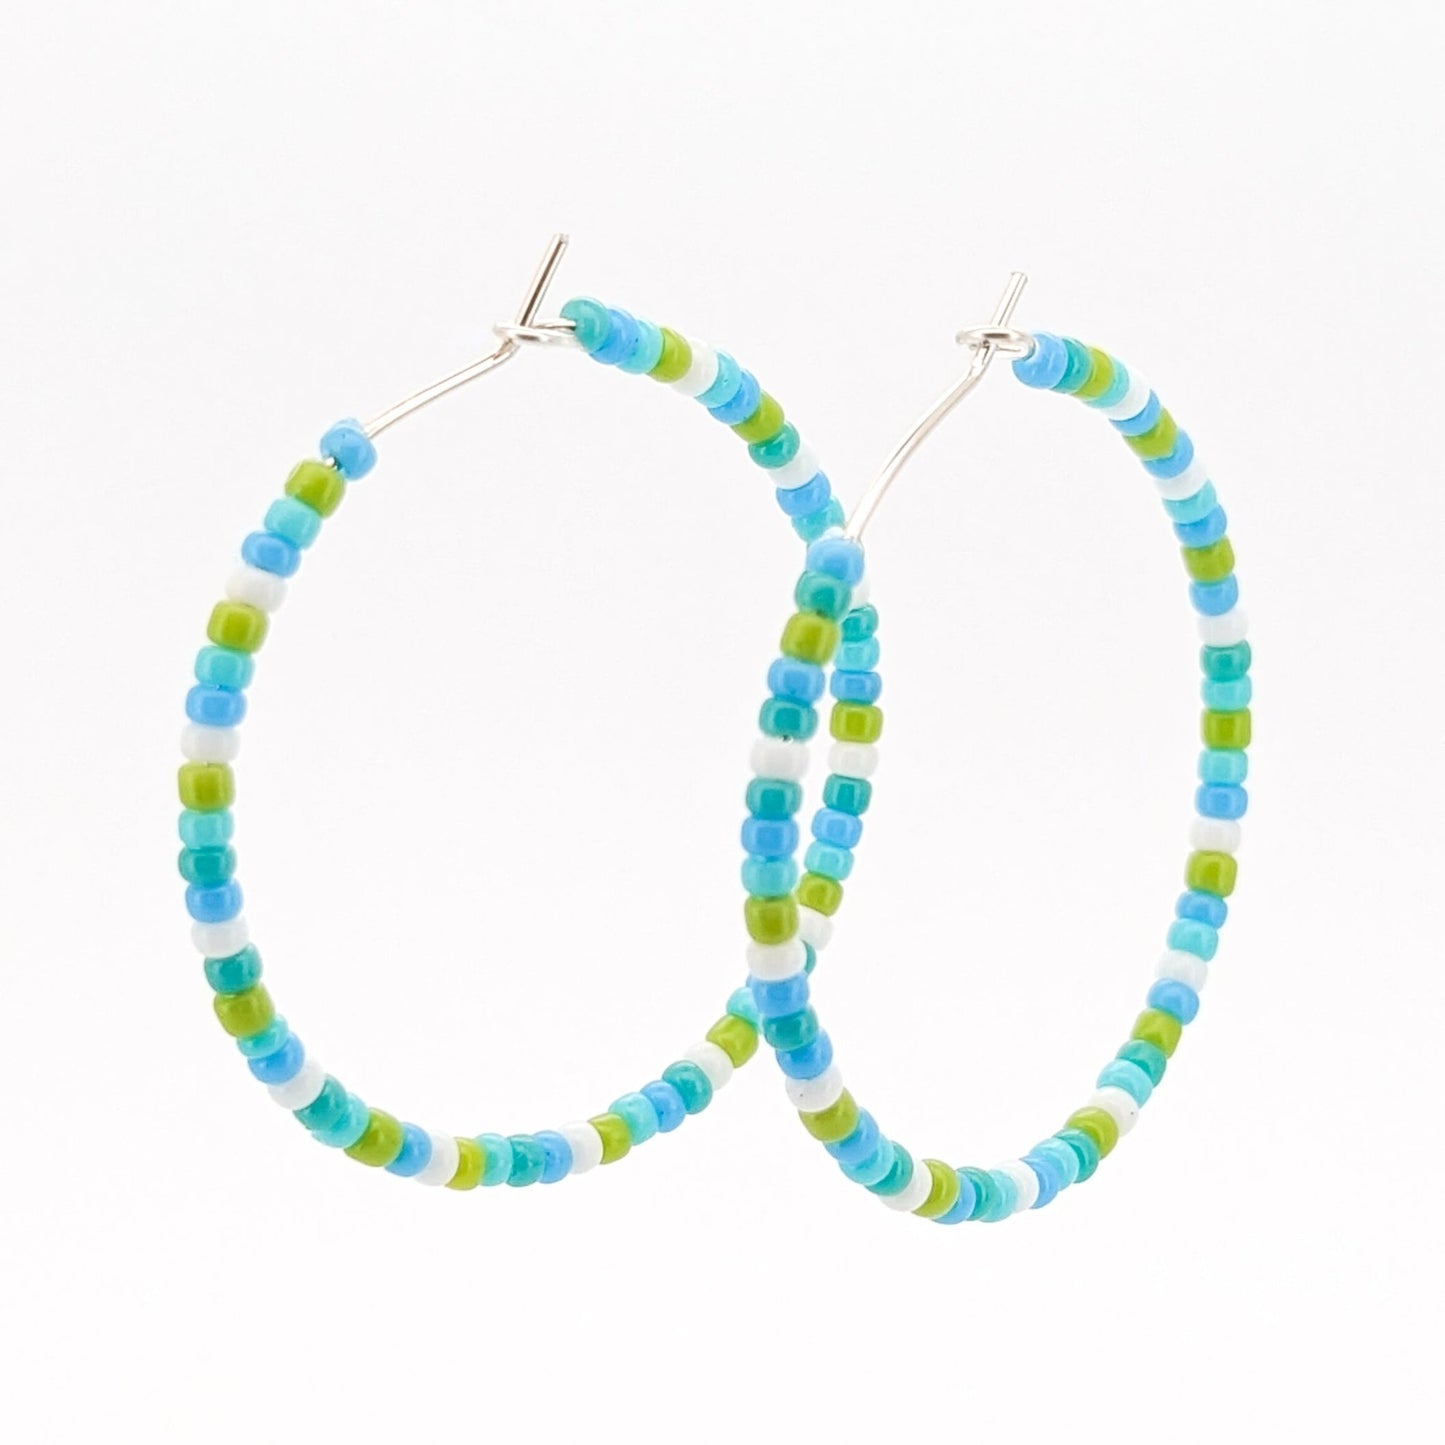 Hoop Earrings - Sterling Silver - Green, Blue, and White - creations by cherie